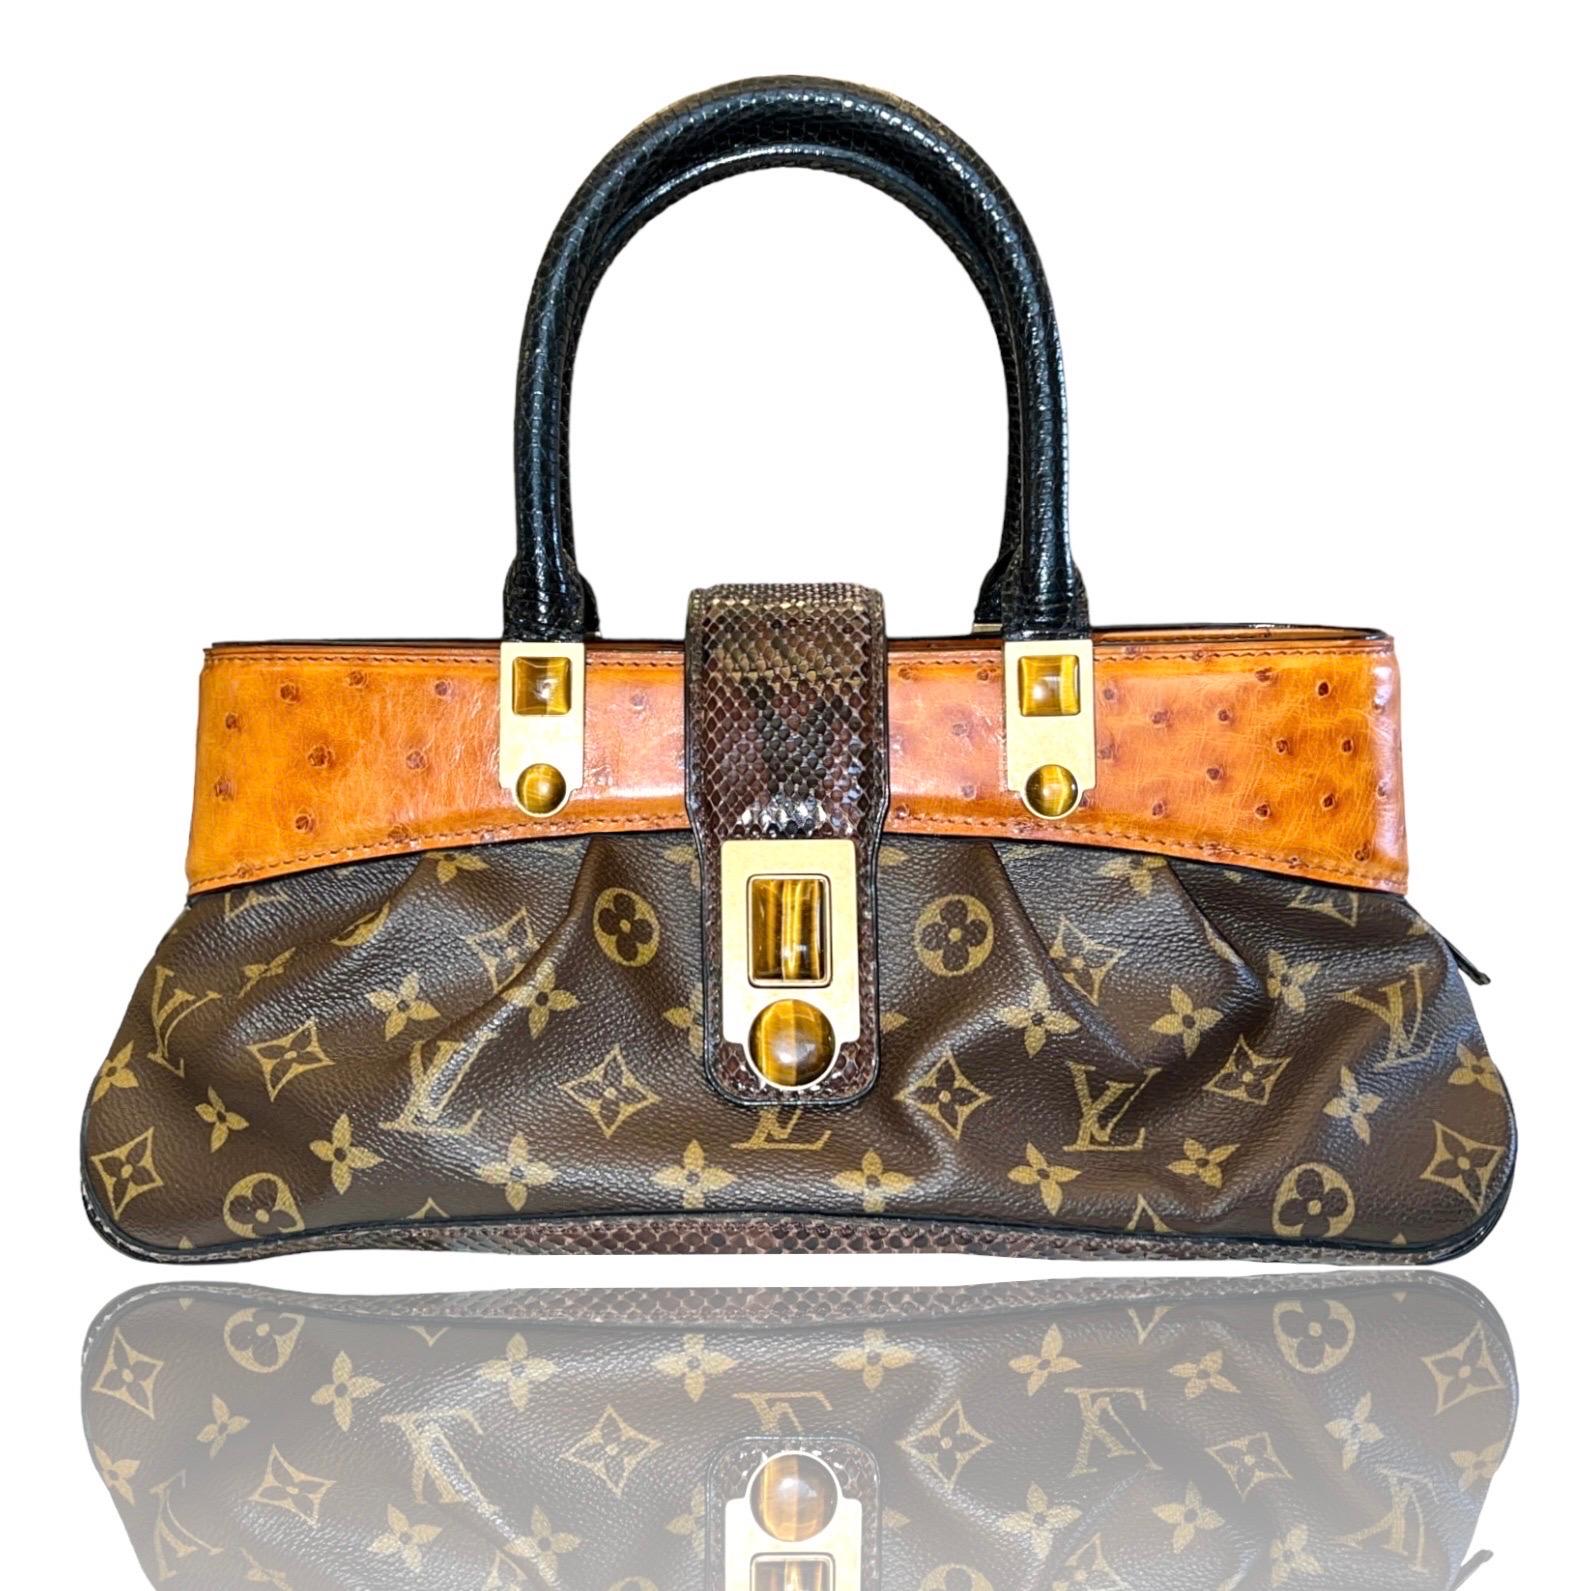 Louis Vuitton by Marc Jacobs FW 2005 bag
As seen on Uma Thurman
Gorgeous Monogram Canvas combined with precious exotic skins - a dream!

Details:

A Louis Vuitton signature piece that will last you for many years, from one of Vuitton's most stunning